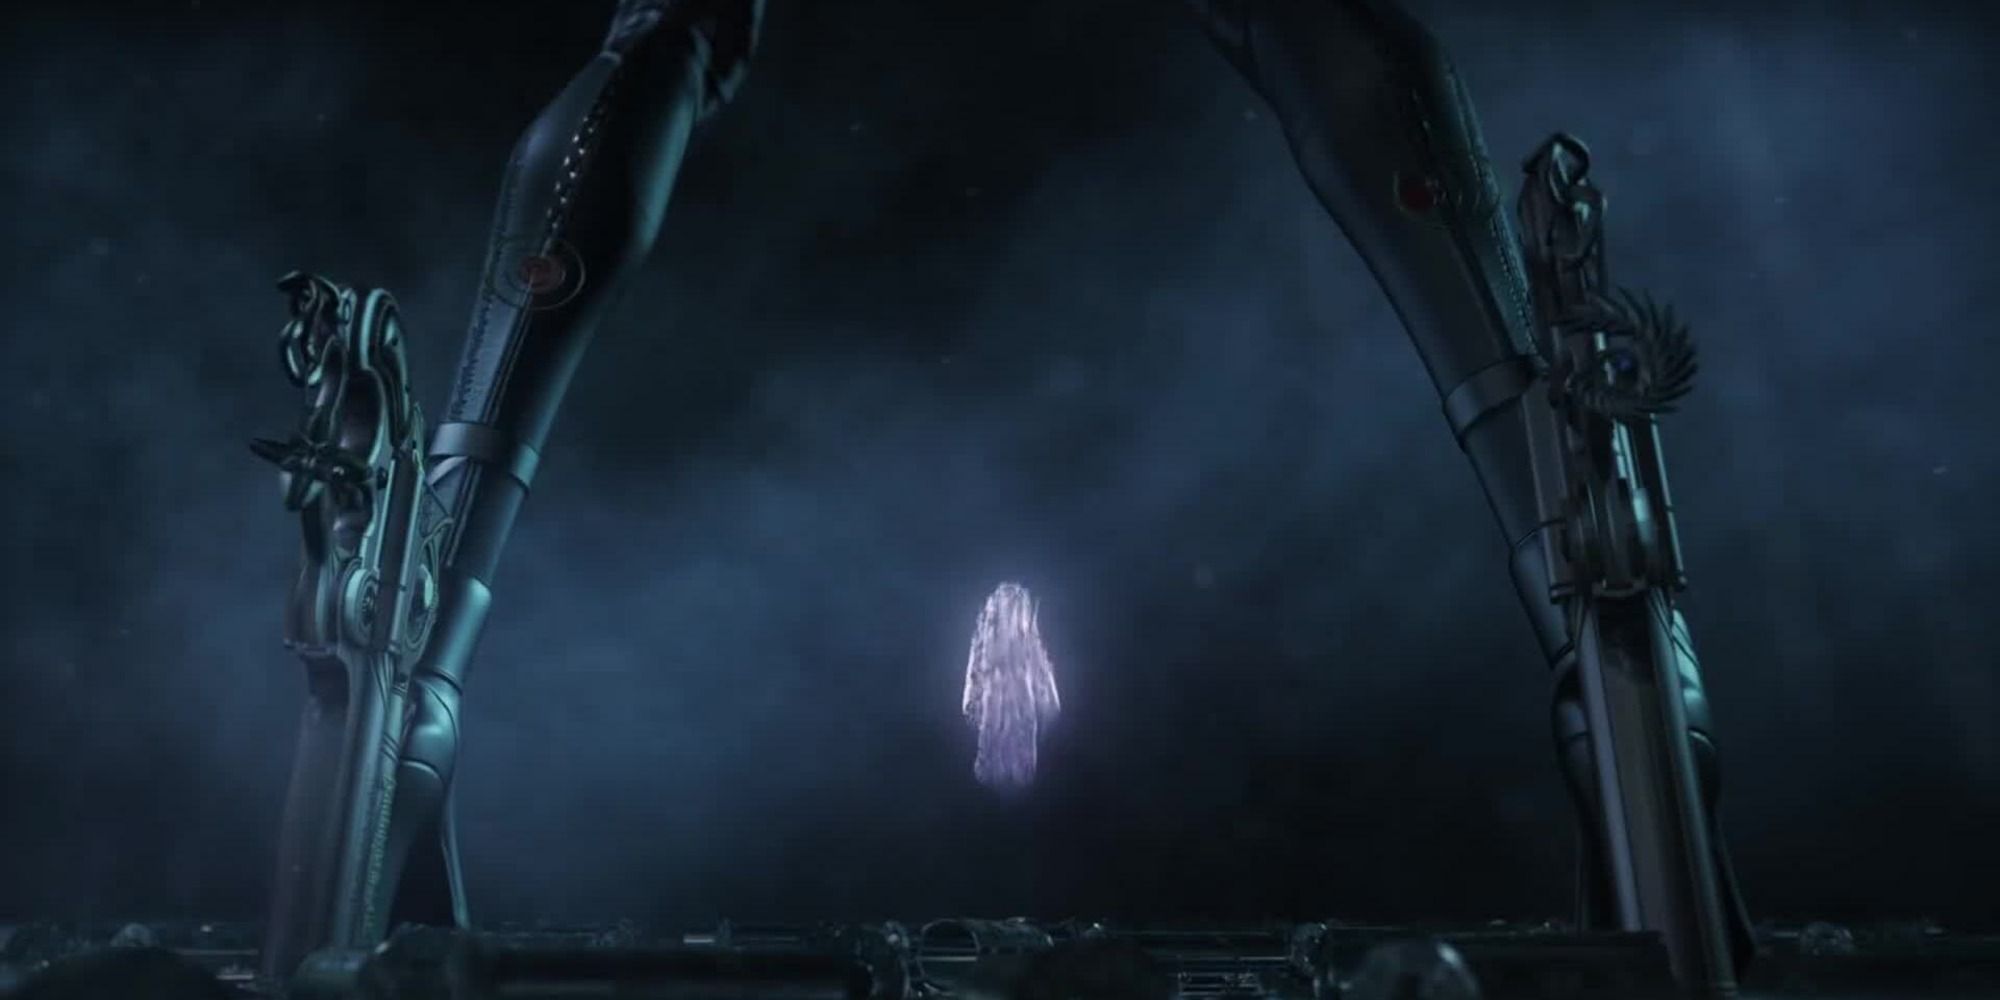 A still from the teaser trailer for Bayonetta 3 released in 2017.